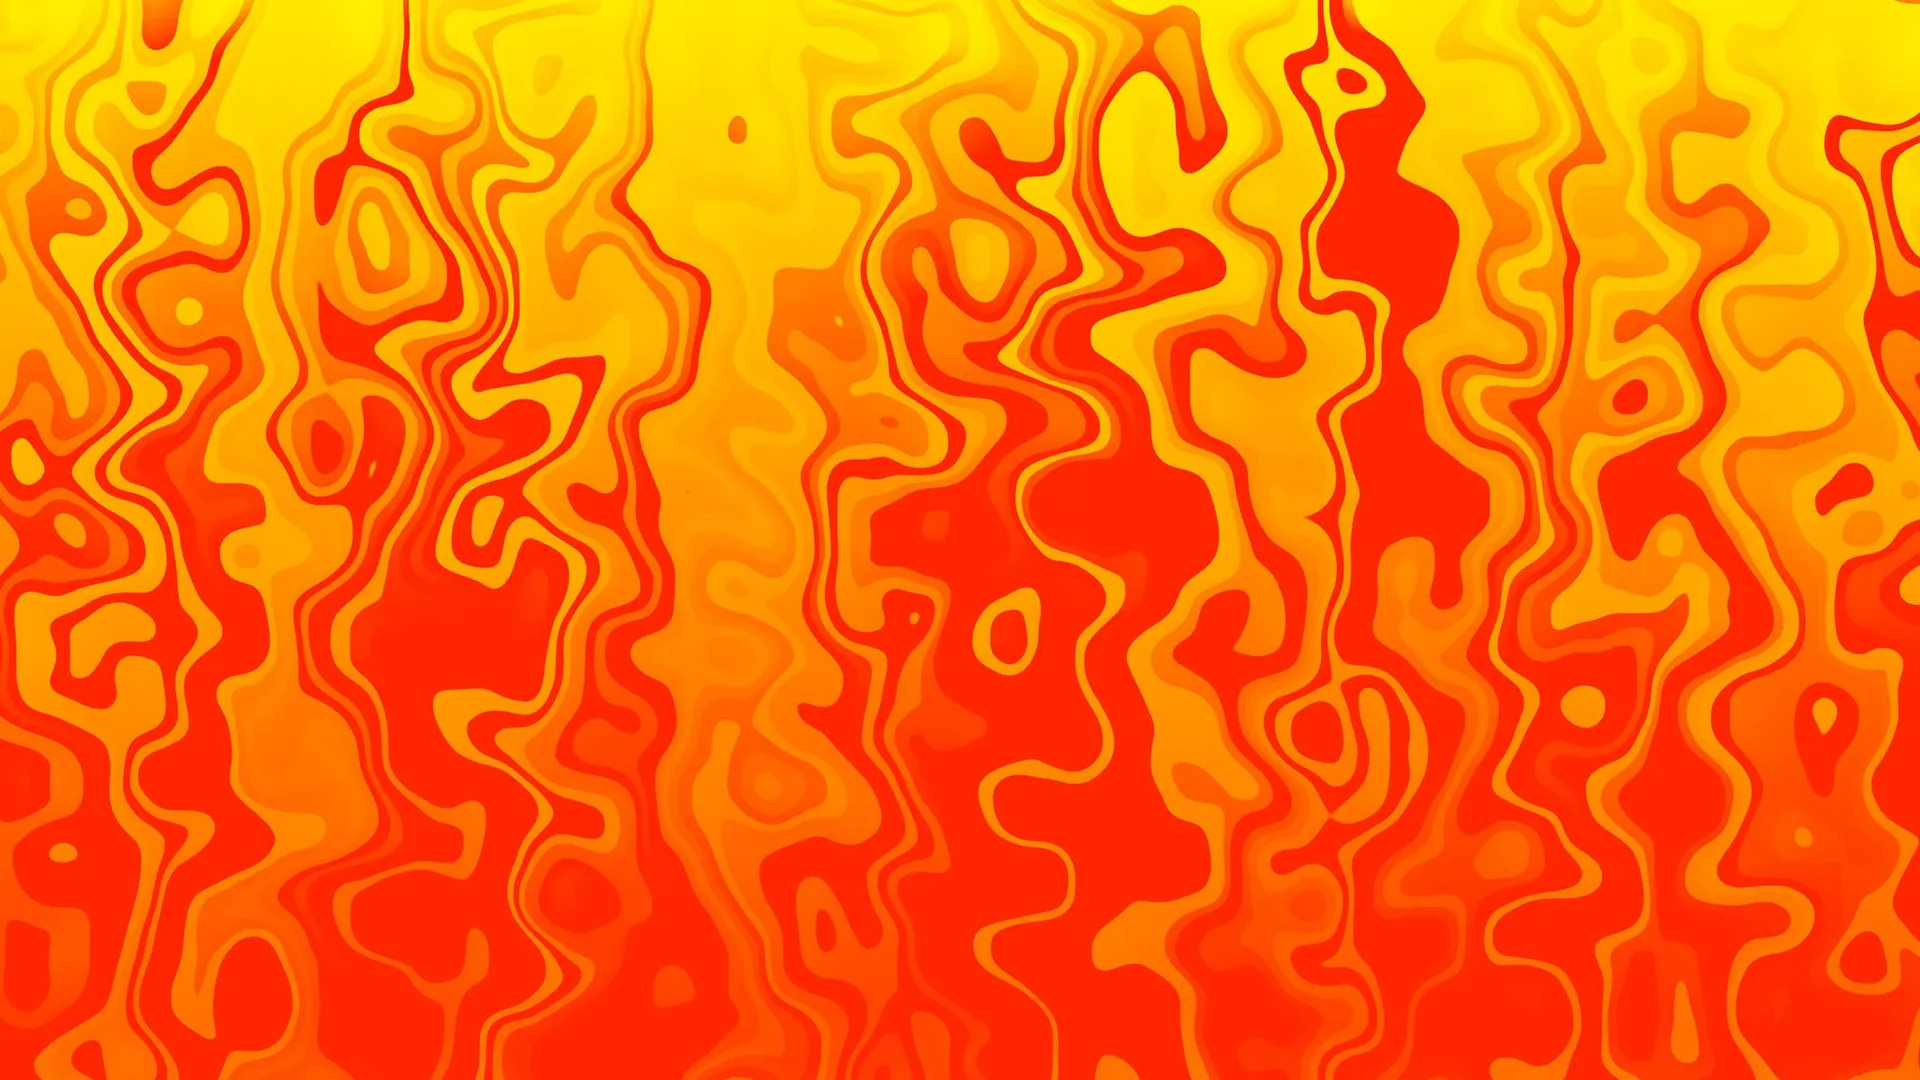 liquid, vortices, turbulence, red, yellow